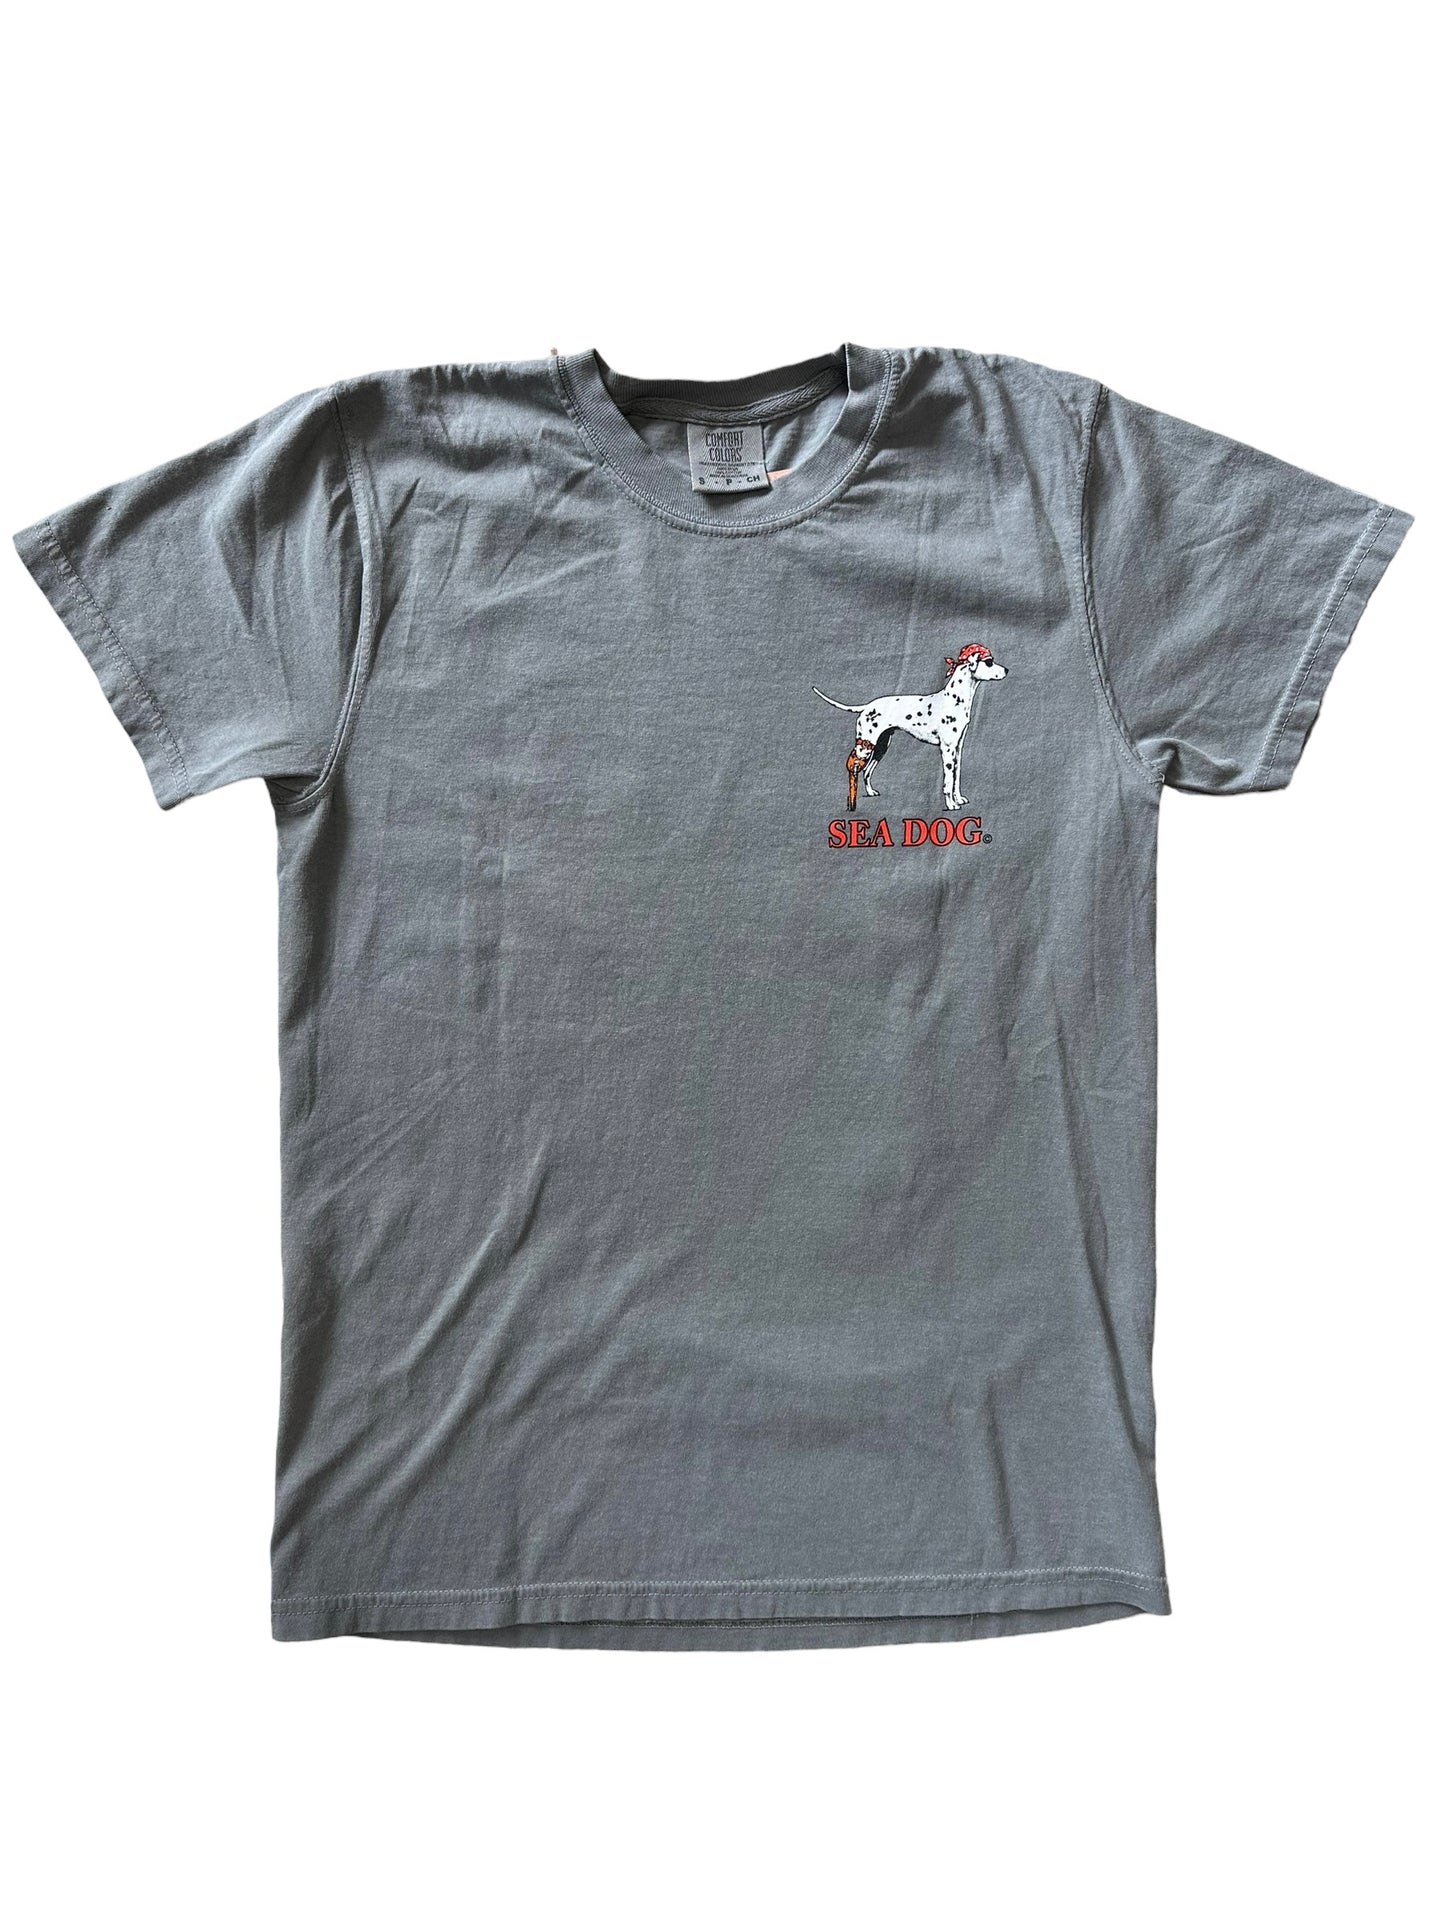 We Are All looking For Tail - Sea Dog T Shirt - Grey